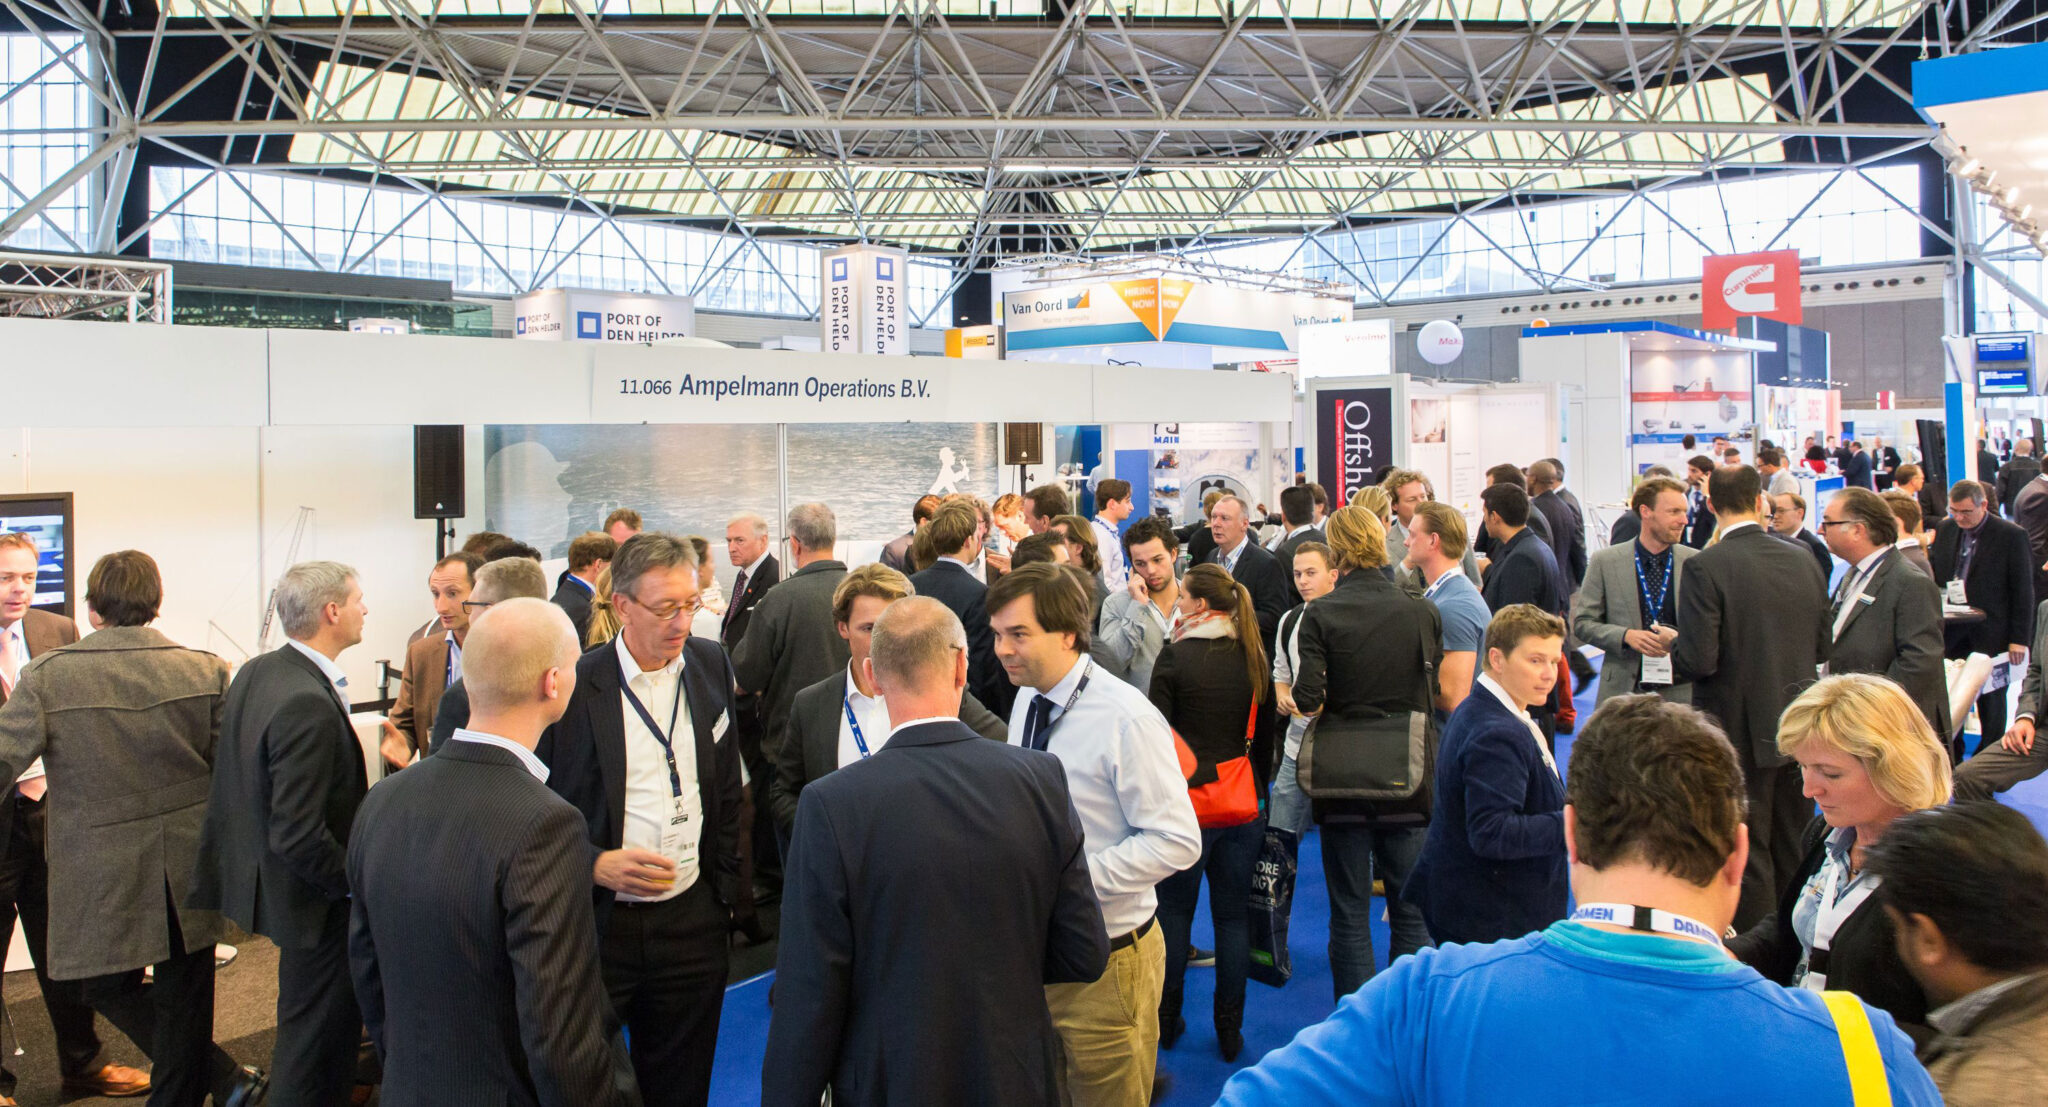 SPE Offshore Europe is the fastest-growing offshore event in Europe